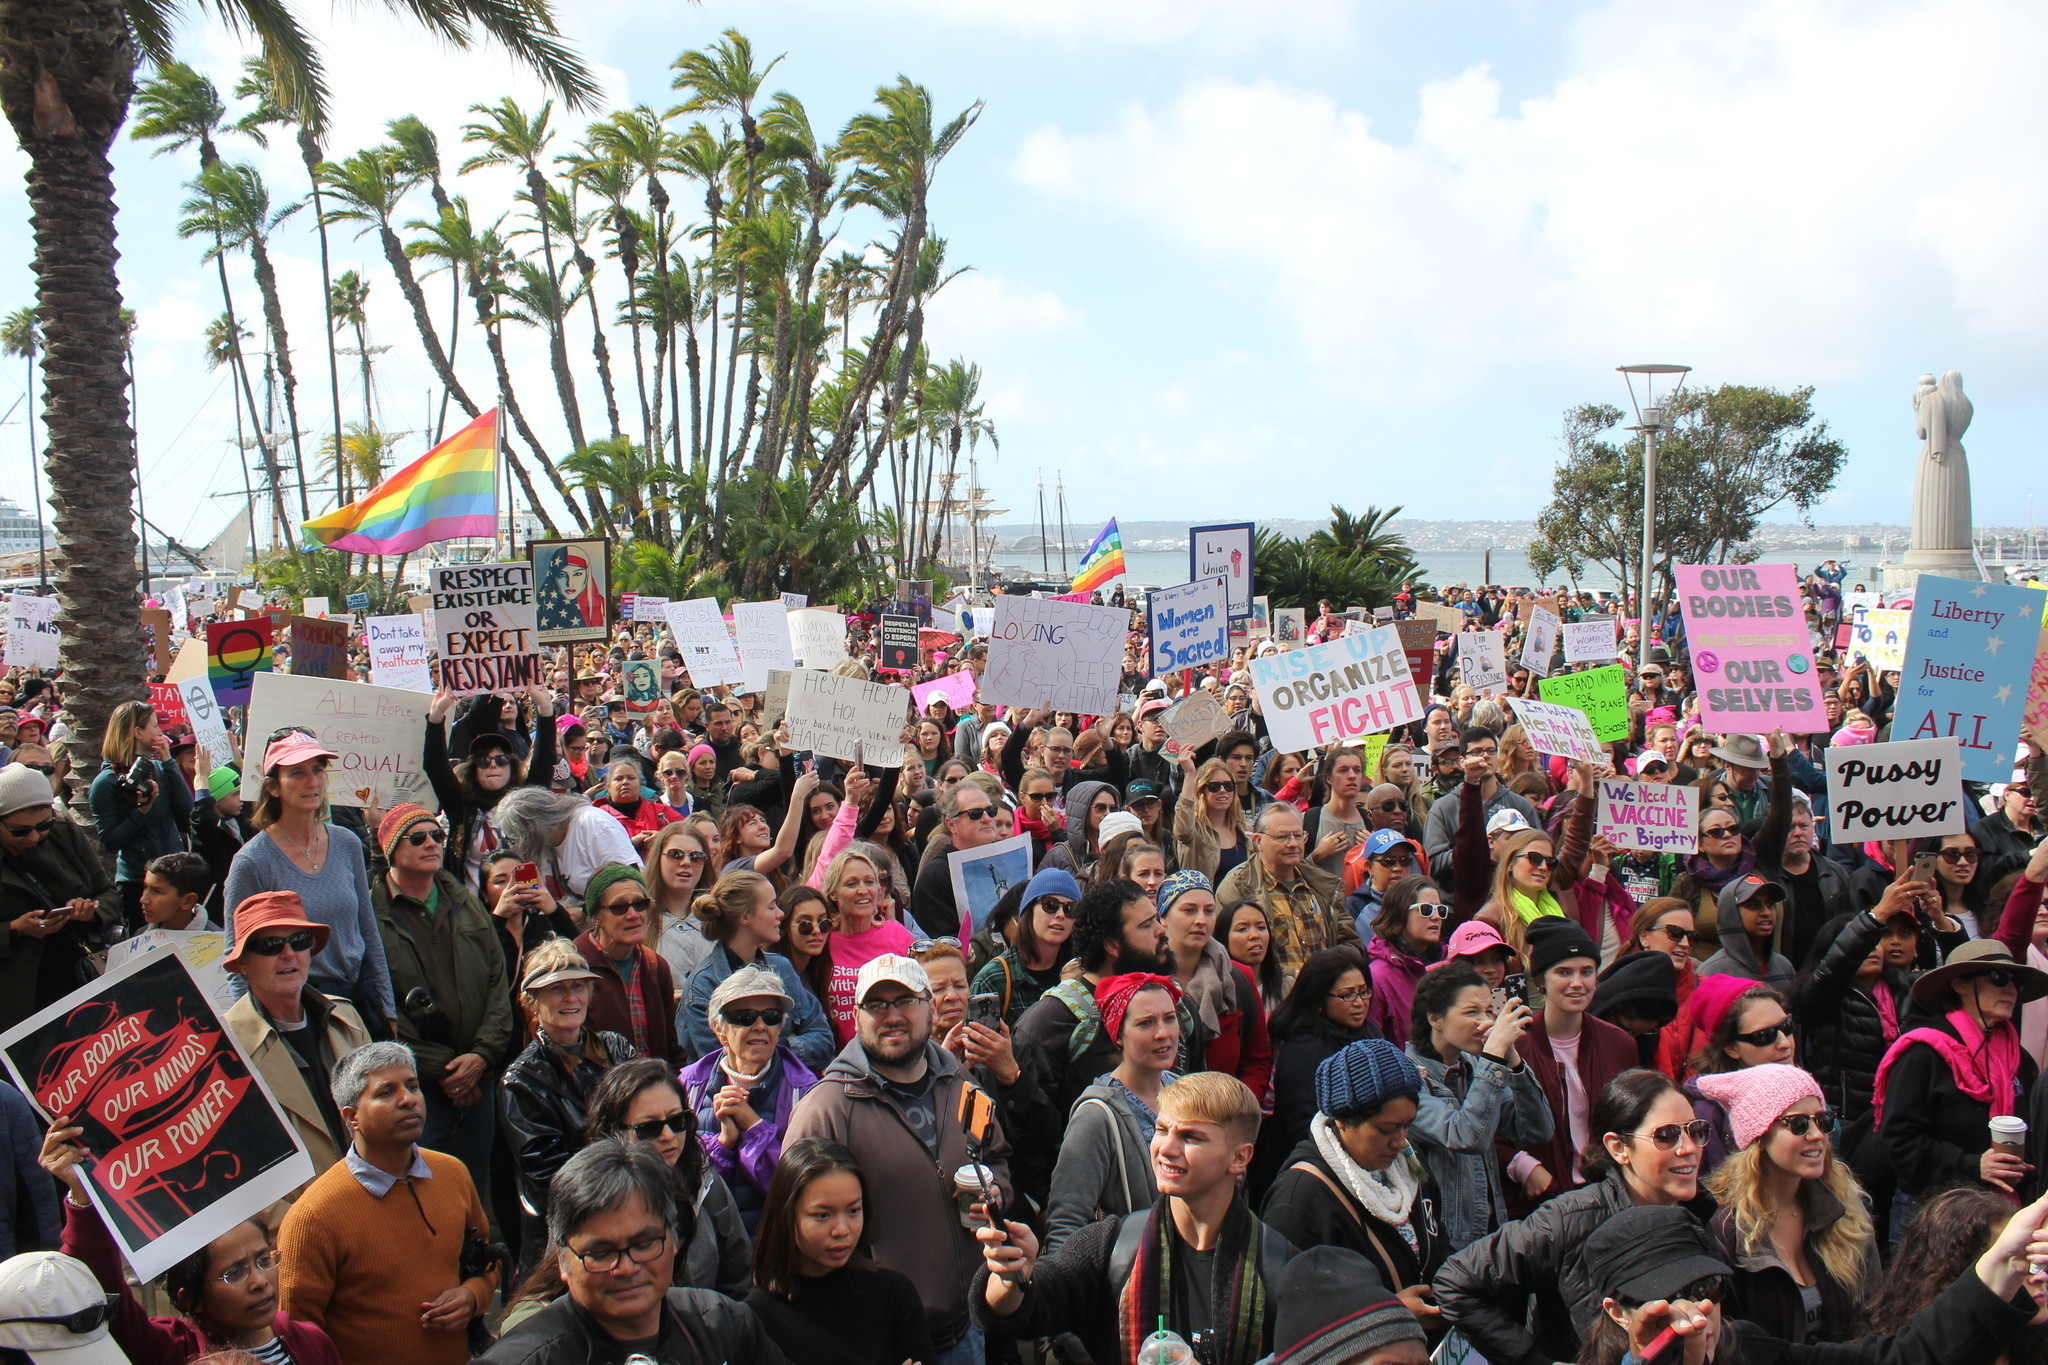 Photos: Tens of thousands turnout for Women’s March in San Diego - La Jolla Light2048 x 1365